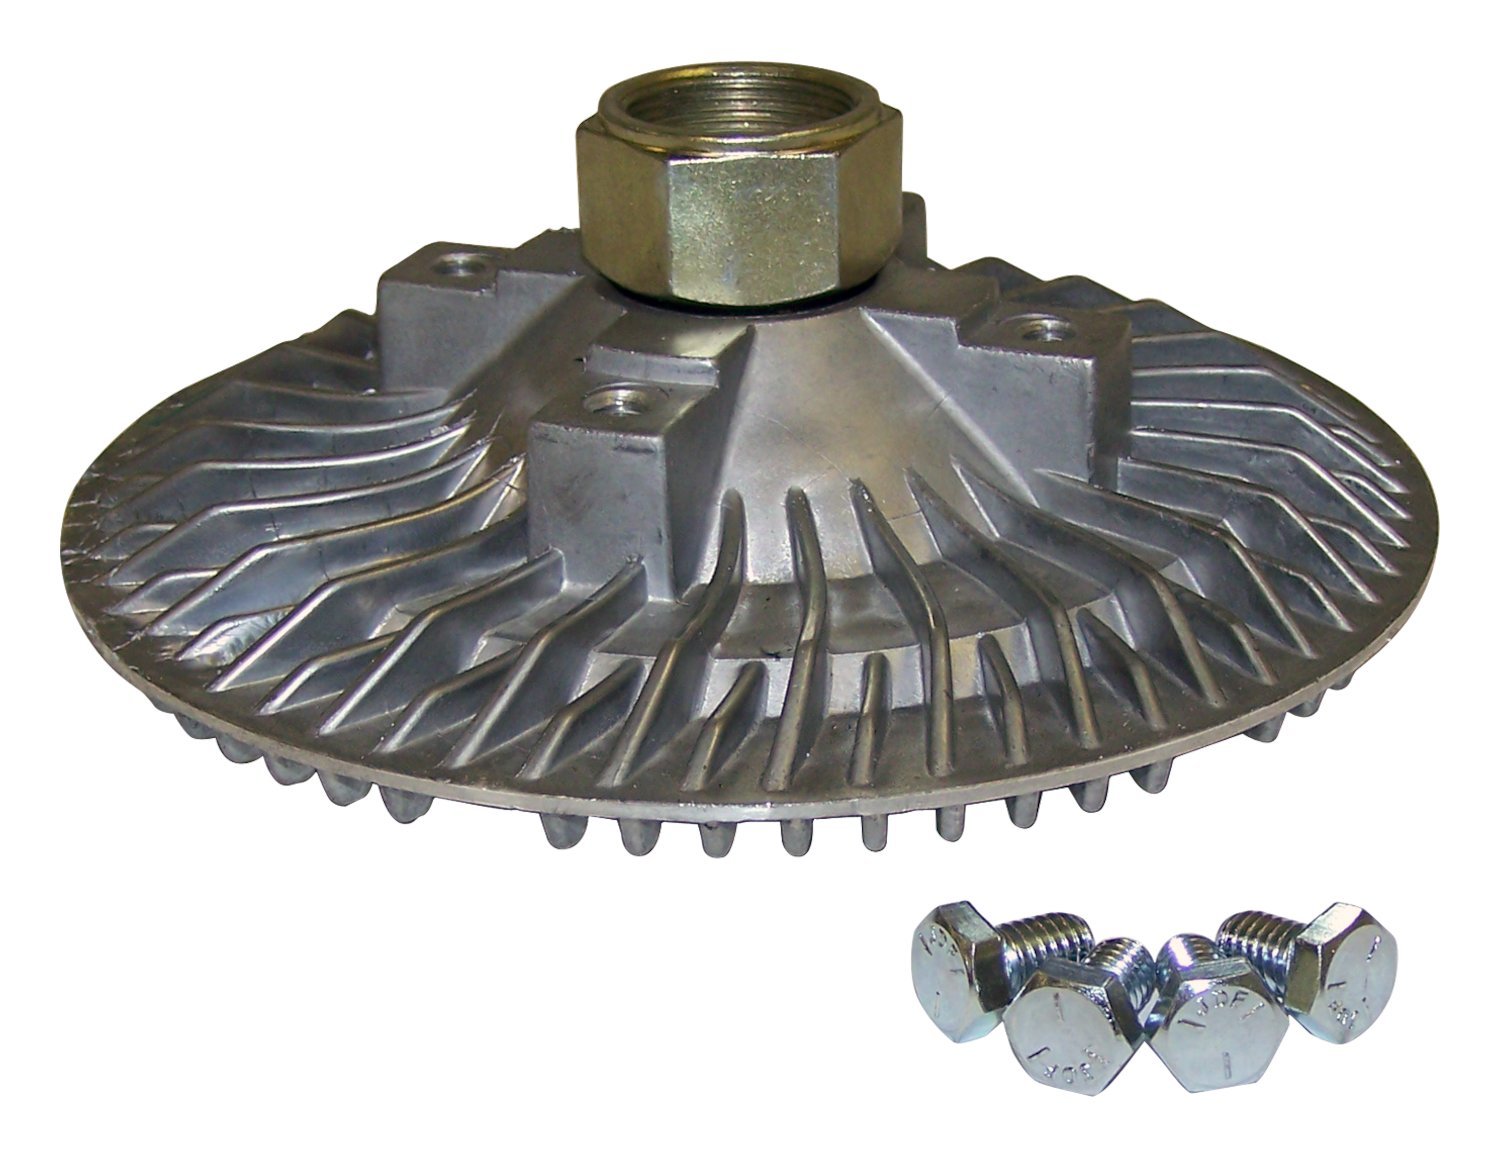 New Fan Clutch for Jeep Grand Cherokee 1999 to 2008